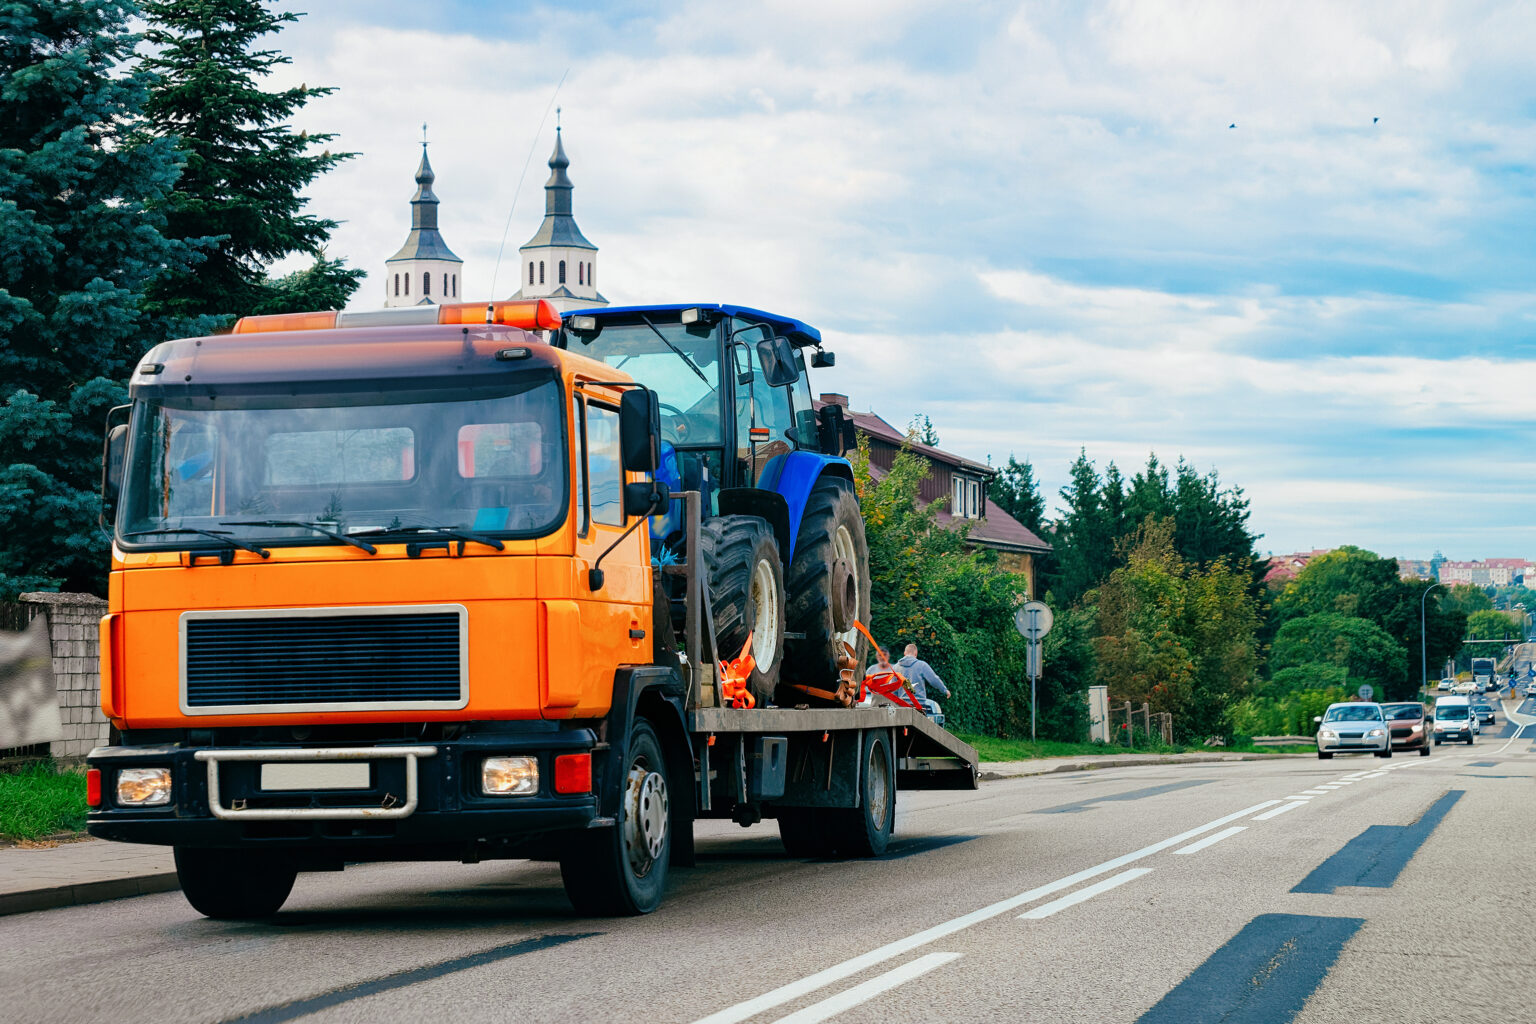 Truck trailer transporter with hauler carrying agricultural tractor on the road in Poland.